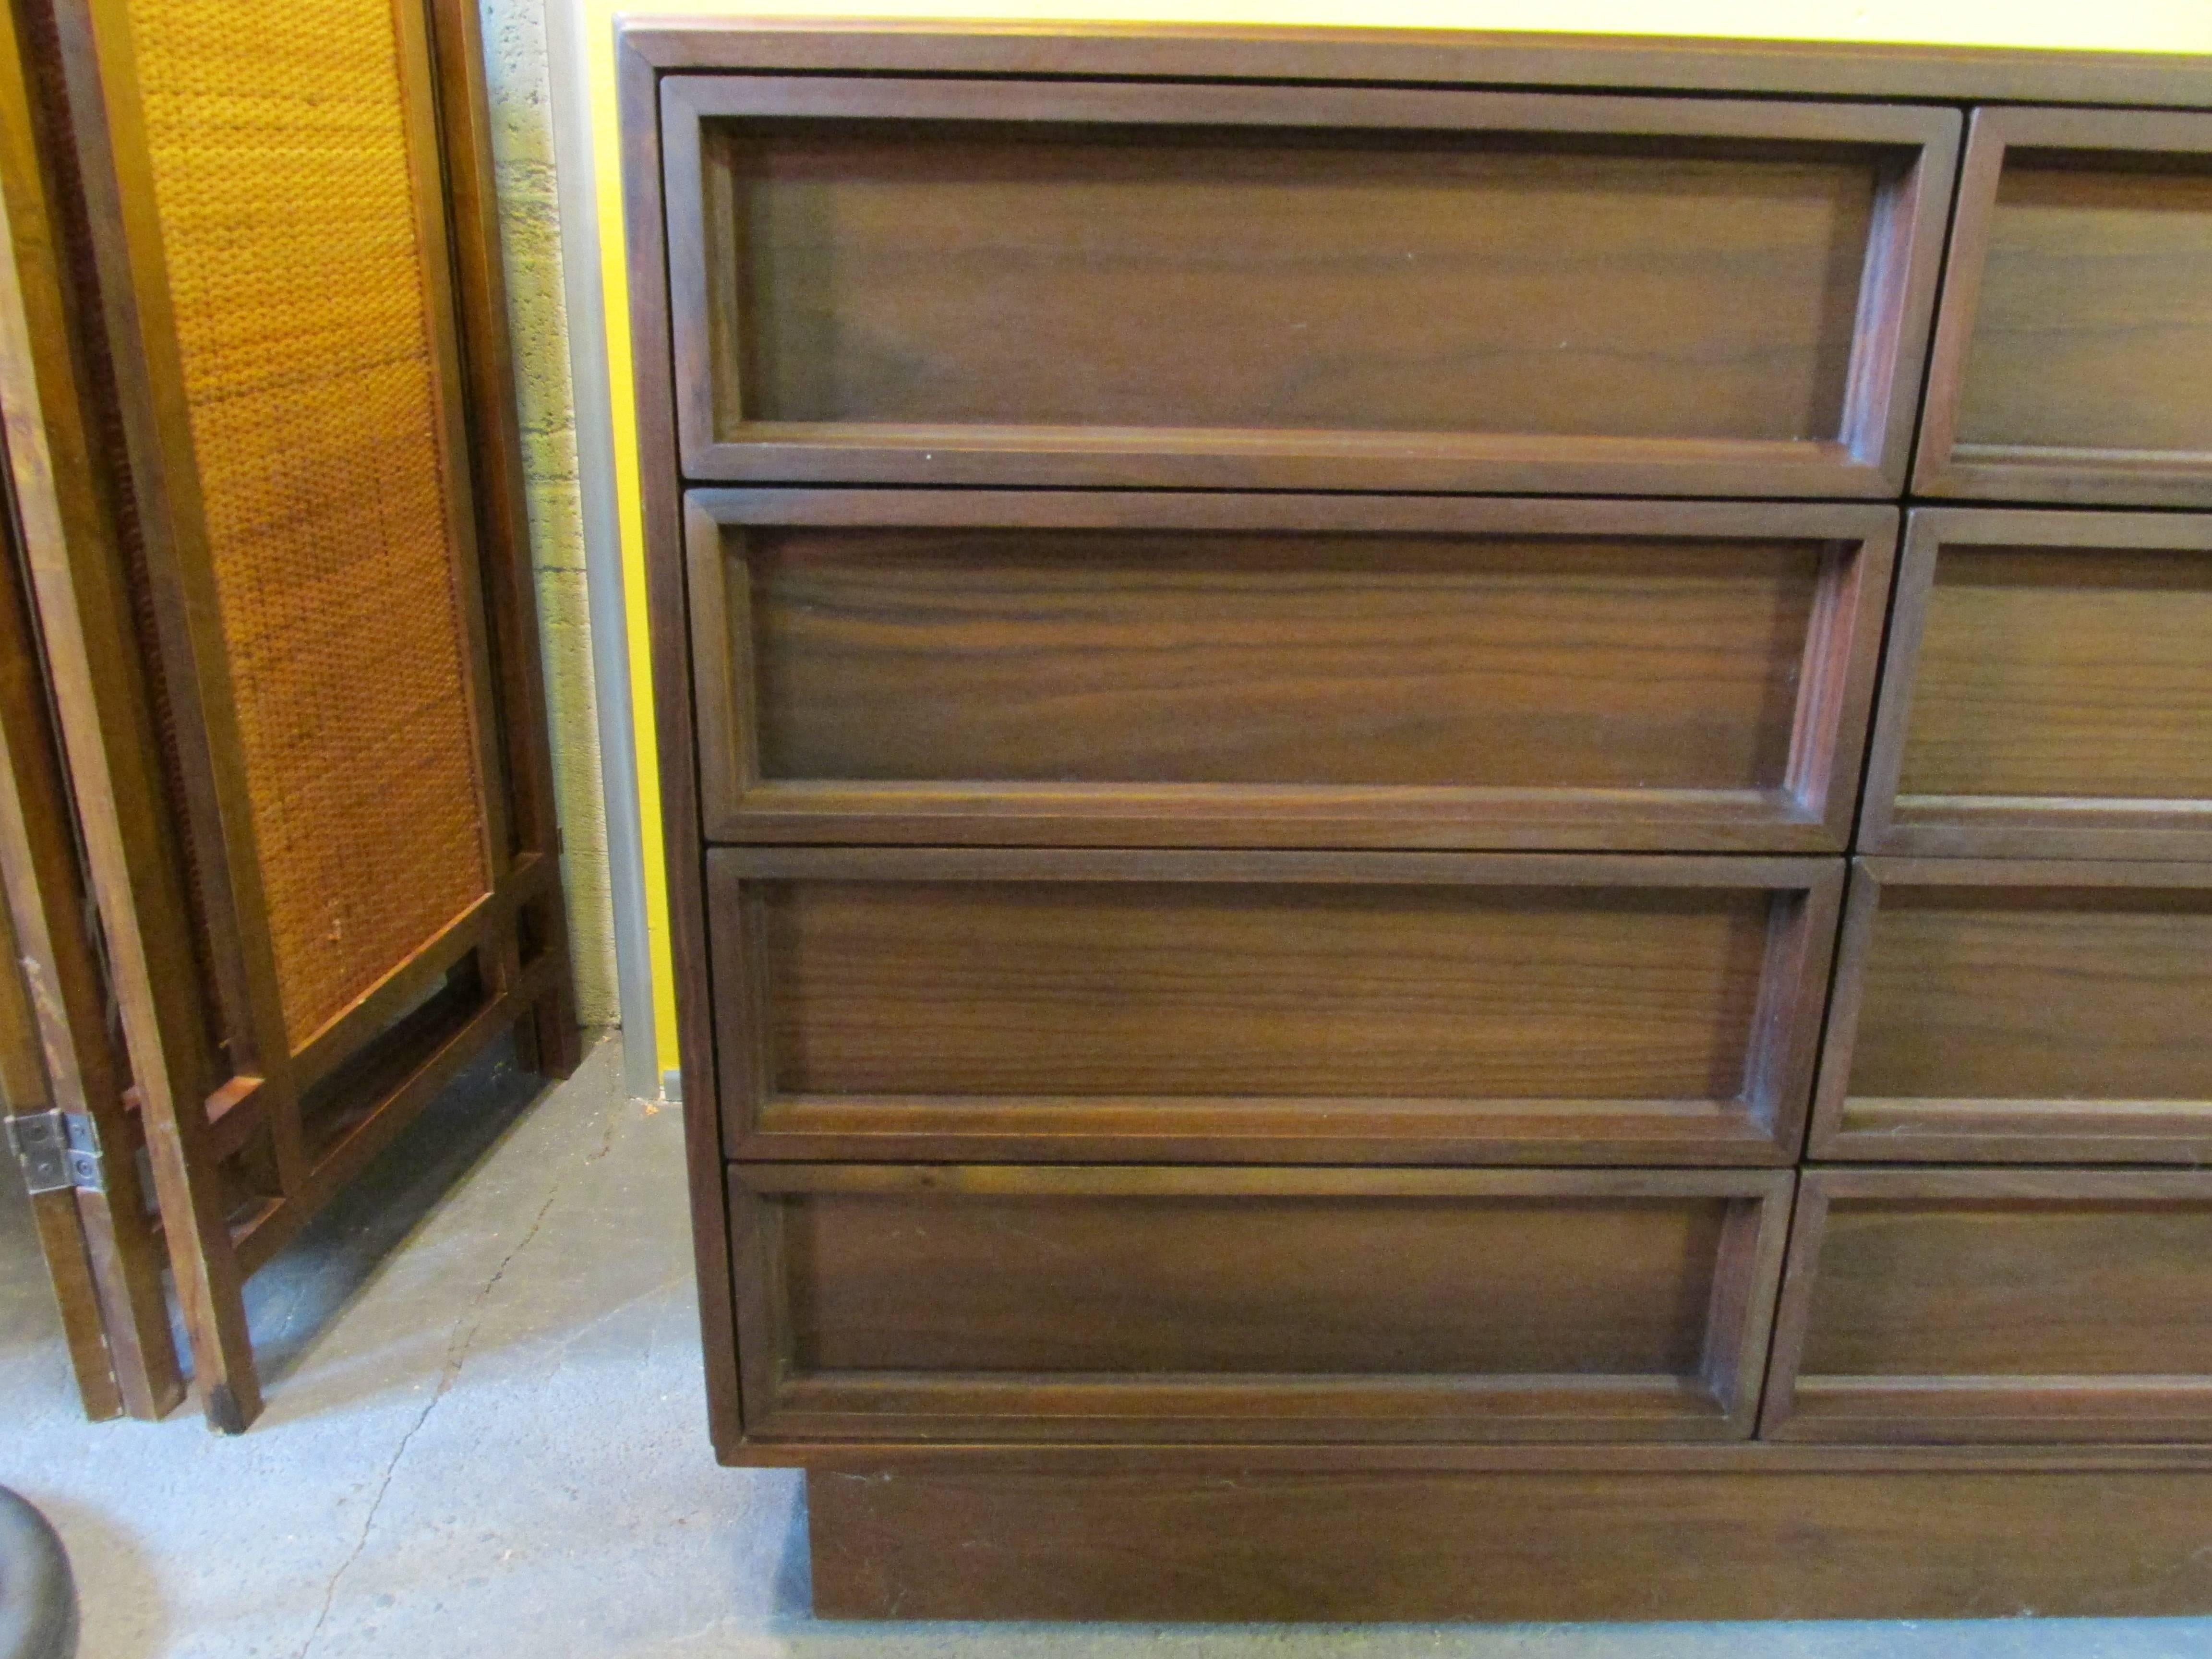 1970s Mid-Century Modern dresser designed by John Keal for Brown-Saltman. Made in California, circa. 1970. Easy open and close drawers with steel glides and solid oak secondary wood. A very nice example of this dresser retaining its original finish.